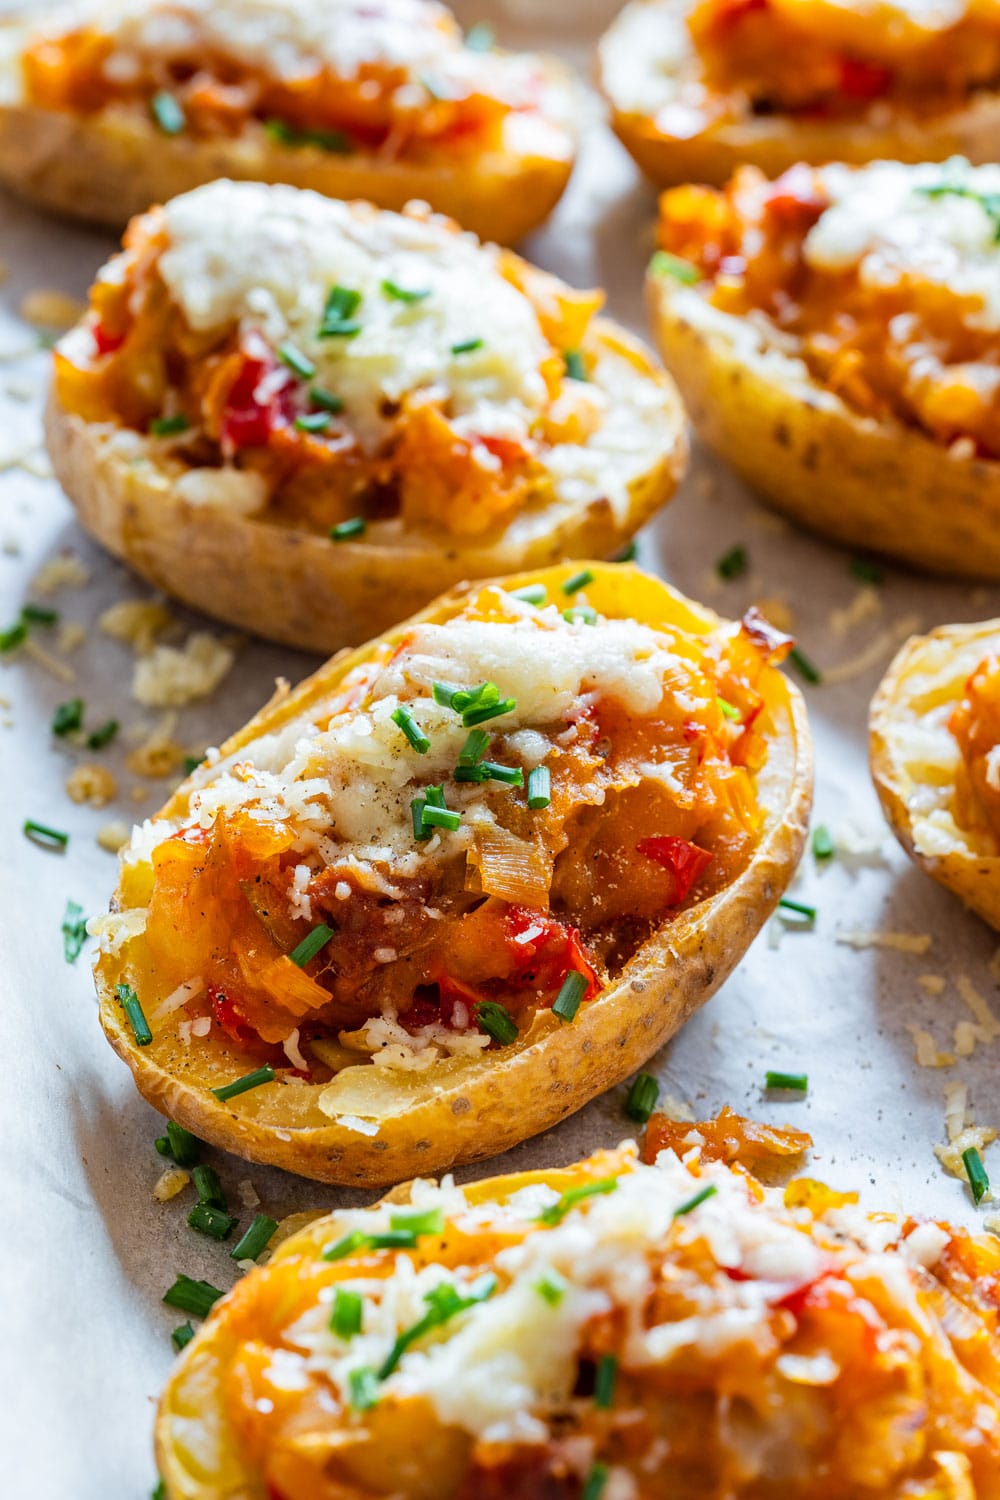 Twice baked potatoes topped with cheese.